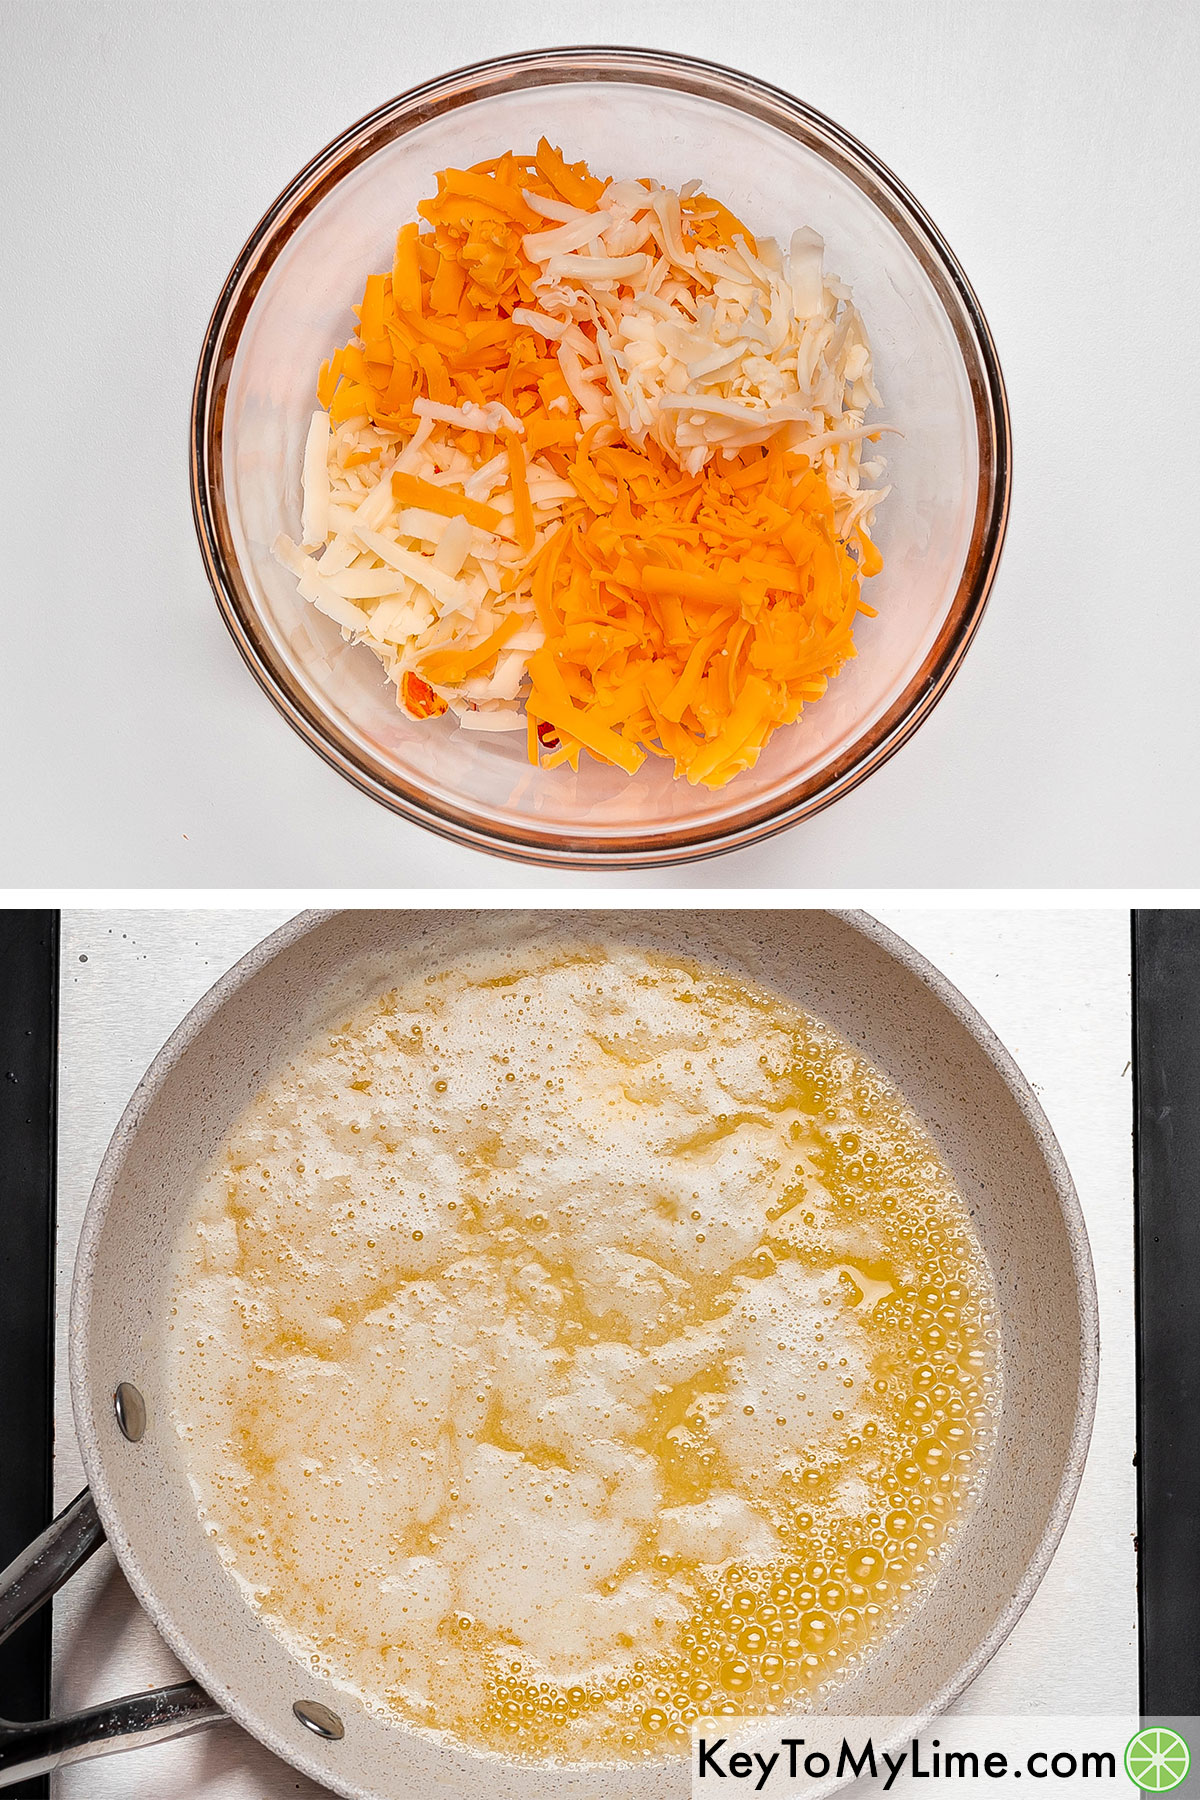 Combining the shredded cheeses together in a medium sized mixing bowl, and then melting butter in a small hot sauce pan.